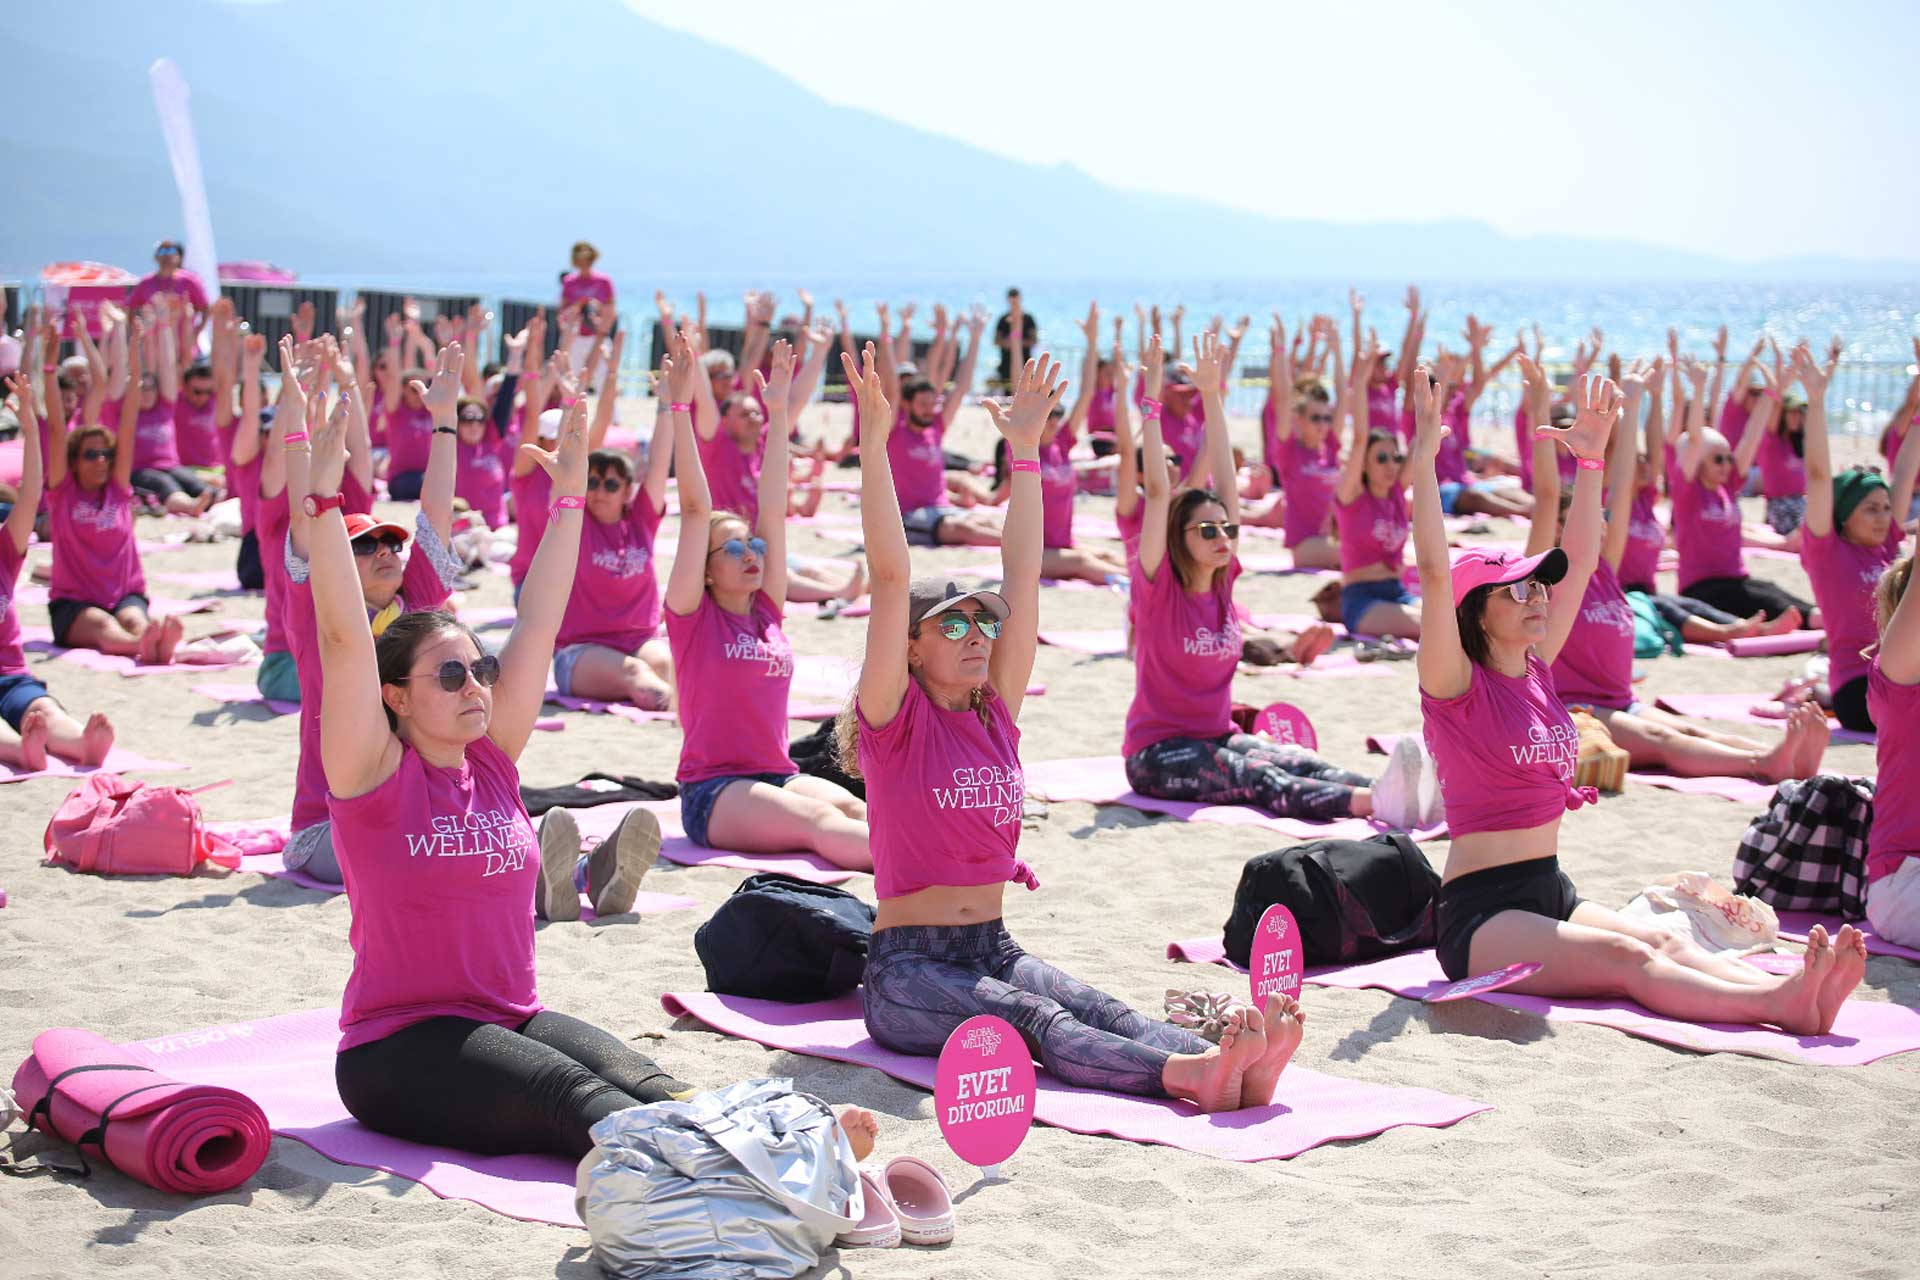 Group of people in pink dress doing yoga